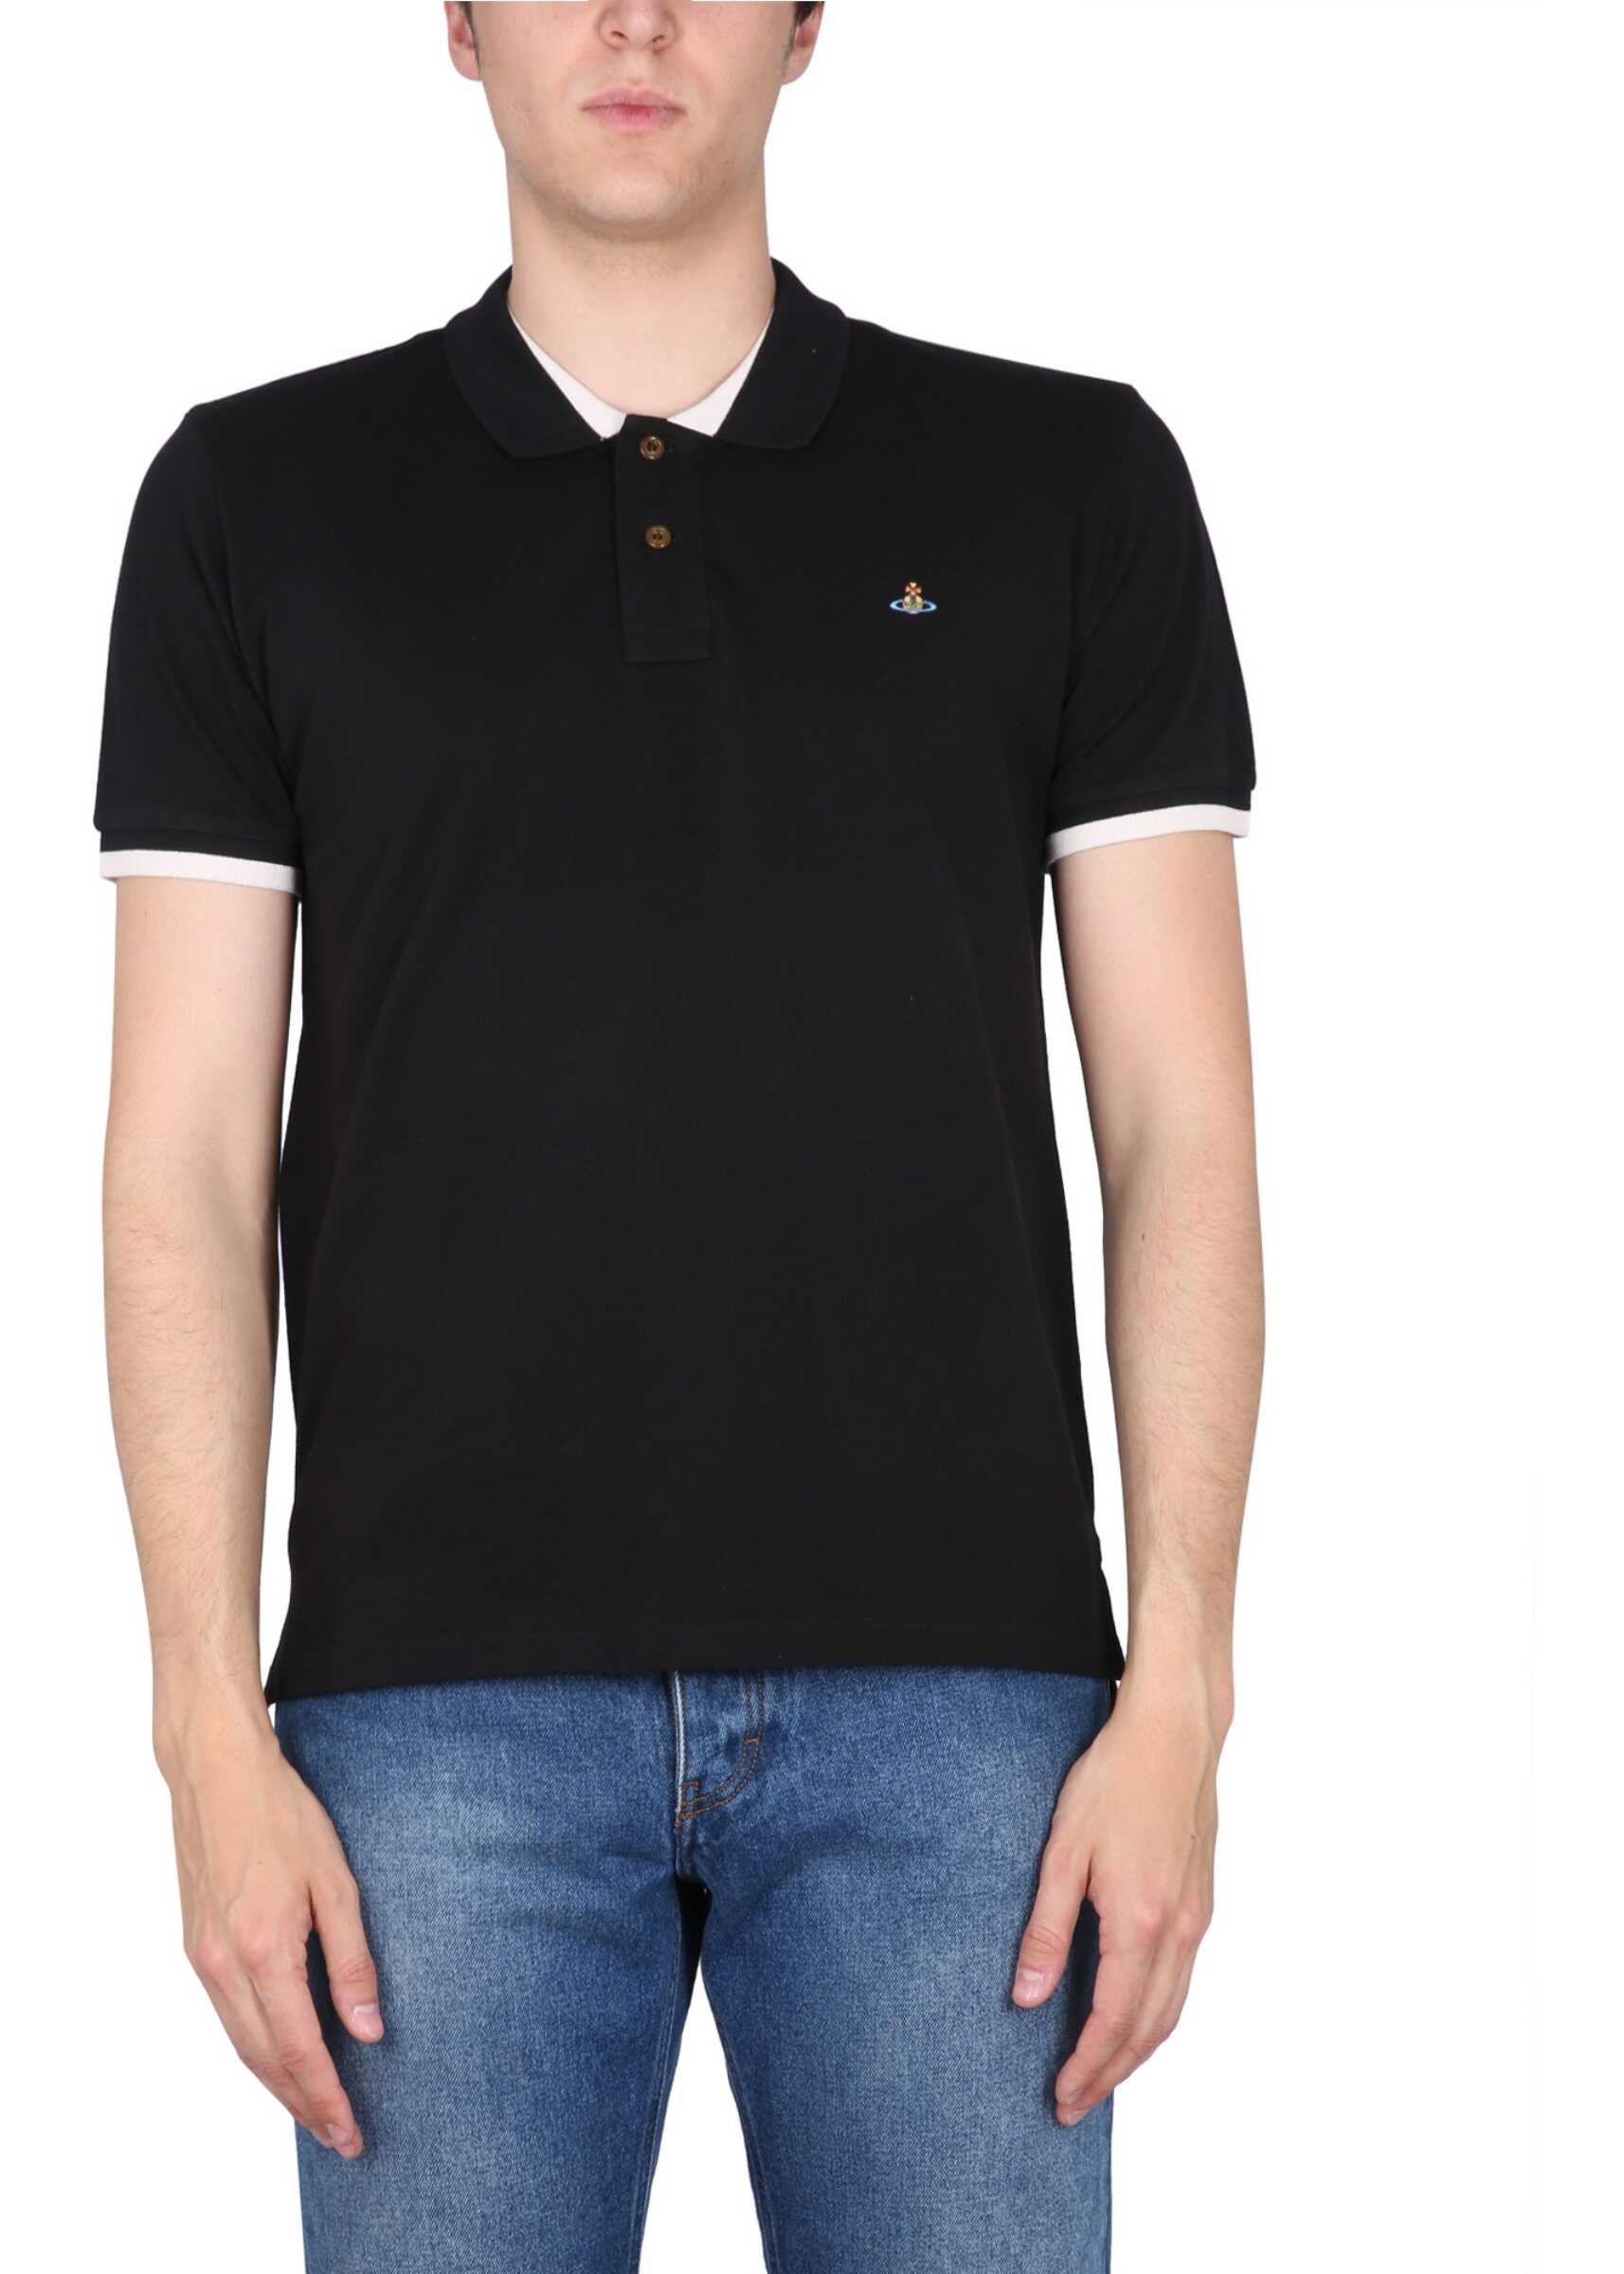 Vivienne Westwood Polo Shirt With Orb Embroidery BLACK